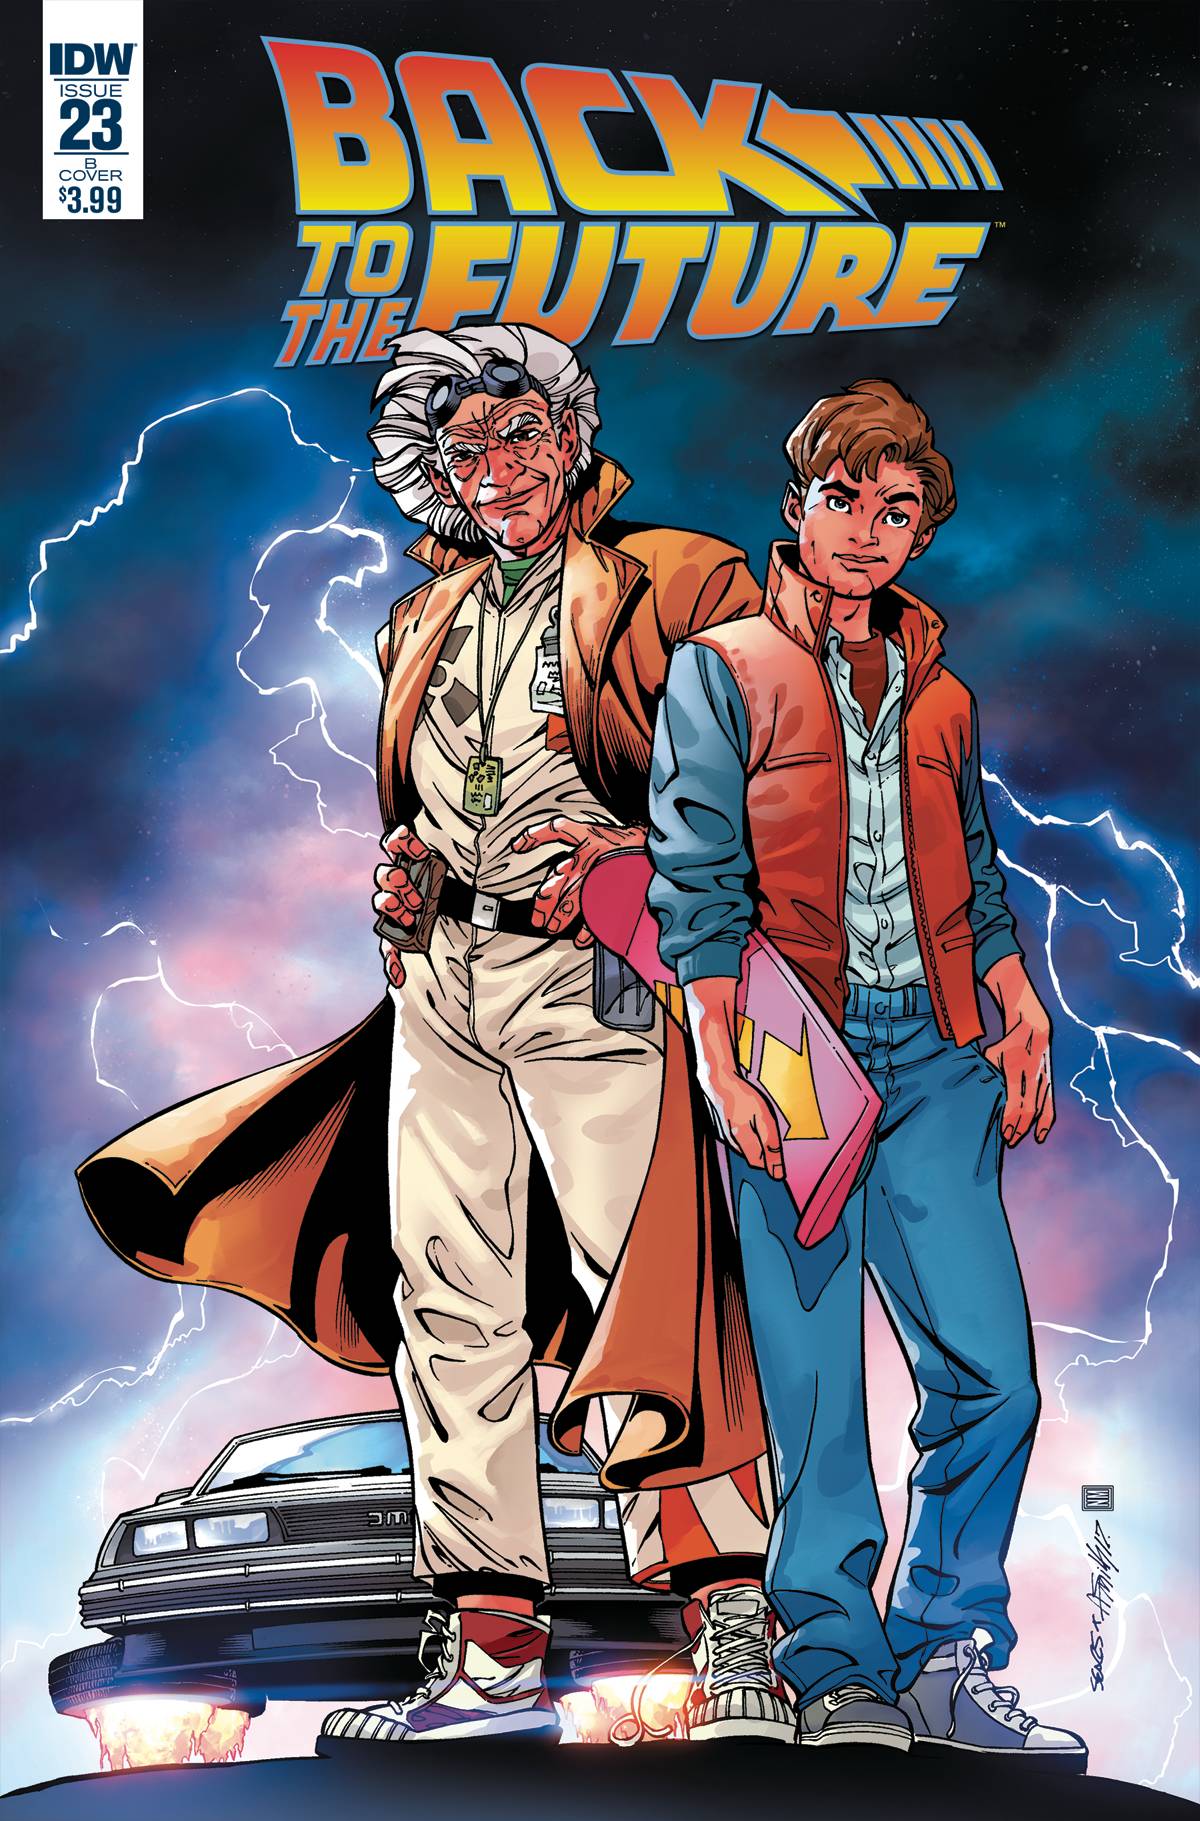 BACK TO THE FUTURE#23